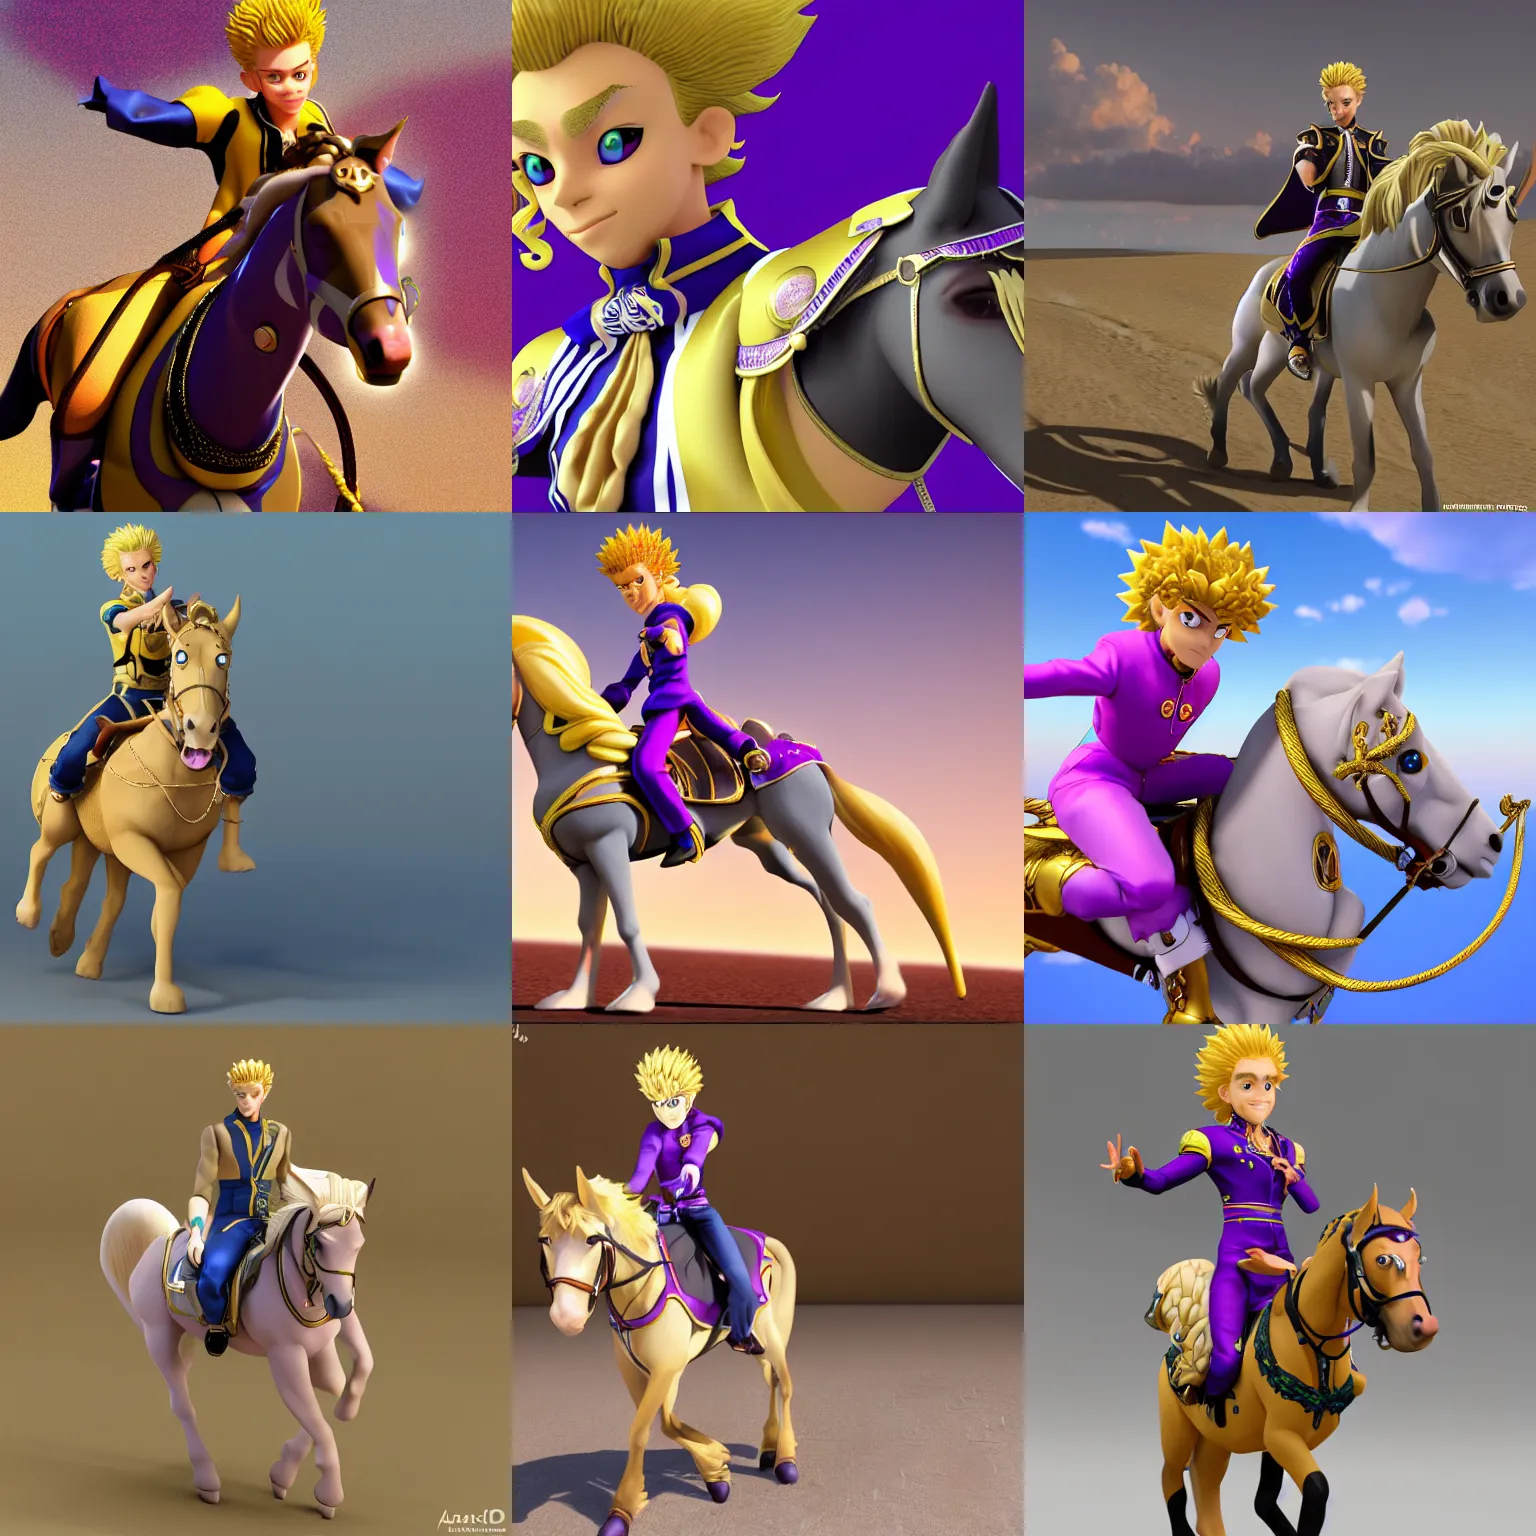 Prompt: a 3d render of jojo\'s bizarre adventure character giorno giovanna riding a horse, Disney Tangled style, hd